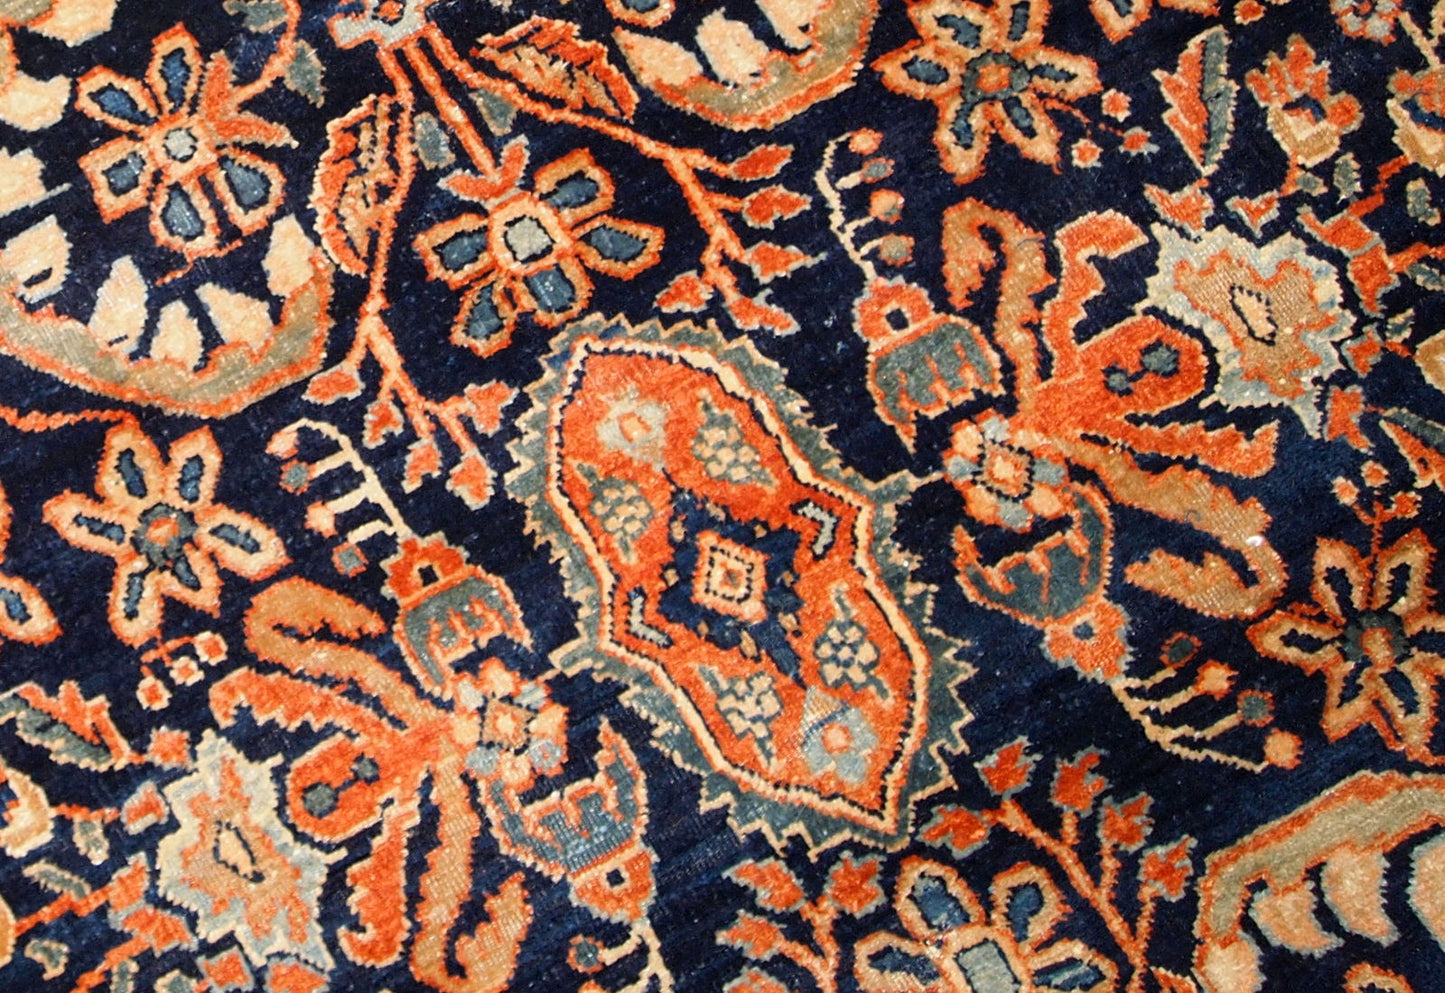 Antique hand-woven Sarouk rug in navy blue color. The rug is in original good condition, made in the beginning of 20th century.